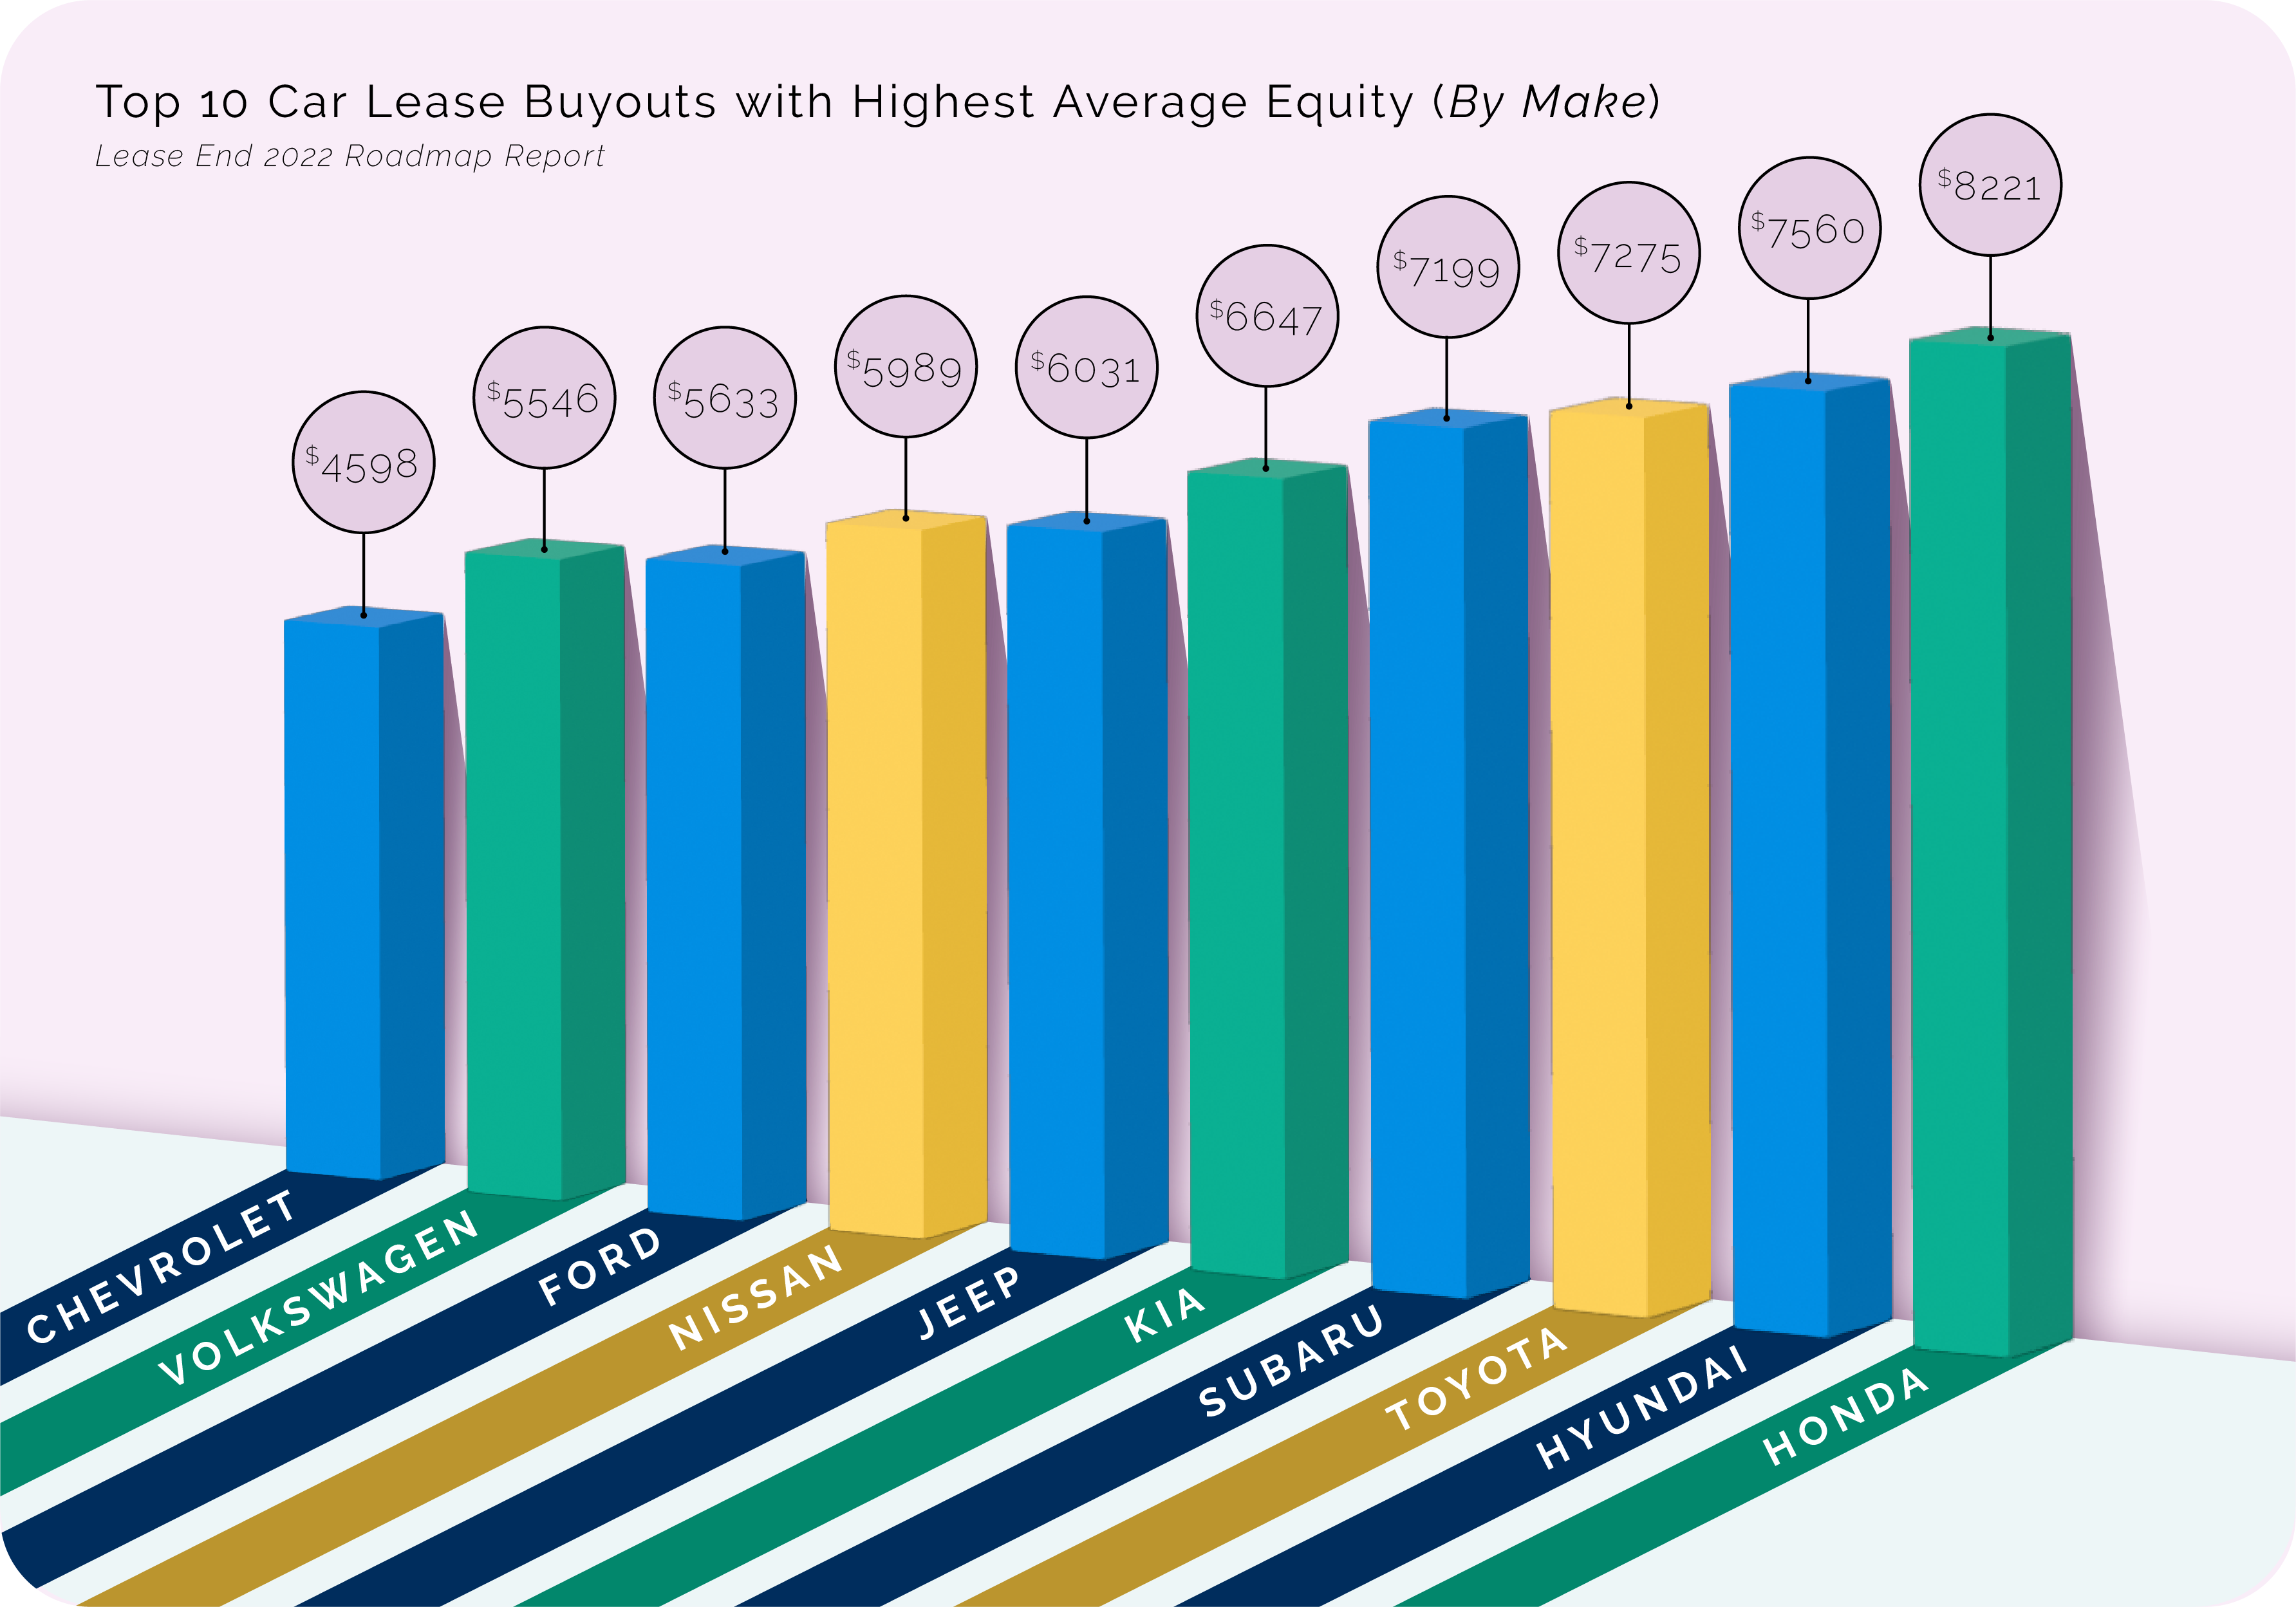 Title: Top 10 Car Lease Buyouts with Highest Average Equity (By Make) from the Lease End 2022 Roadmap Report. Depicts a descending bar graph with the following information about highest average equity for a lease buyout with the following manufacturers, through Lease End. Honda’s average was $8221; Hyundai’s was $7560; Toyota’s was $7275; Subaru’s was $7199; Kia’s was $6647; Jeep’s was $6031; Nissan’s was $5989; Ford’s was $5633; Volkswagen’s was $5546; and Chevrolet’s was $4598.